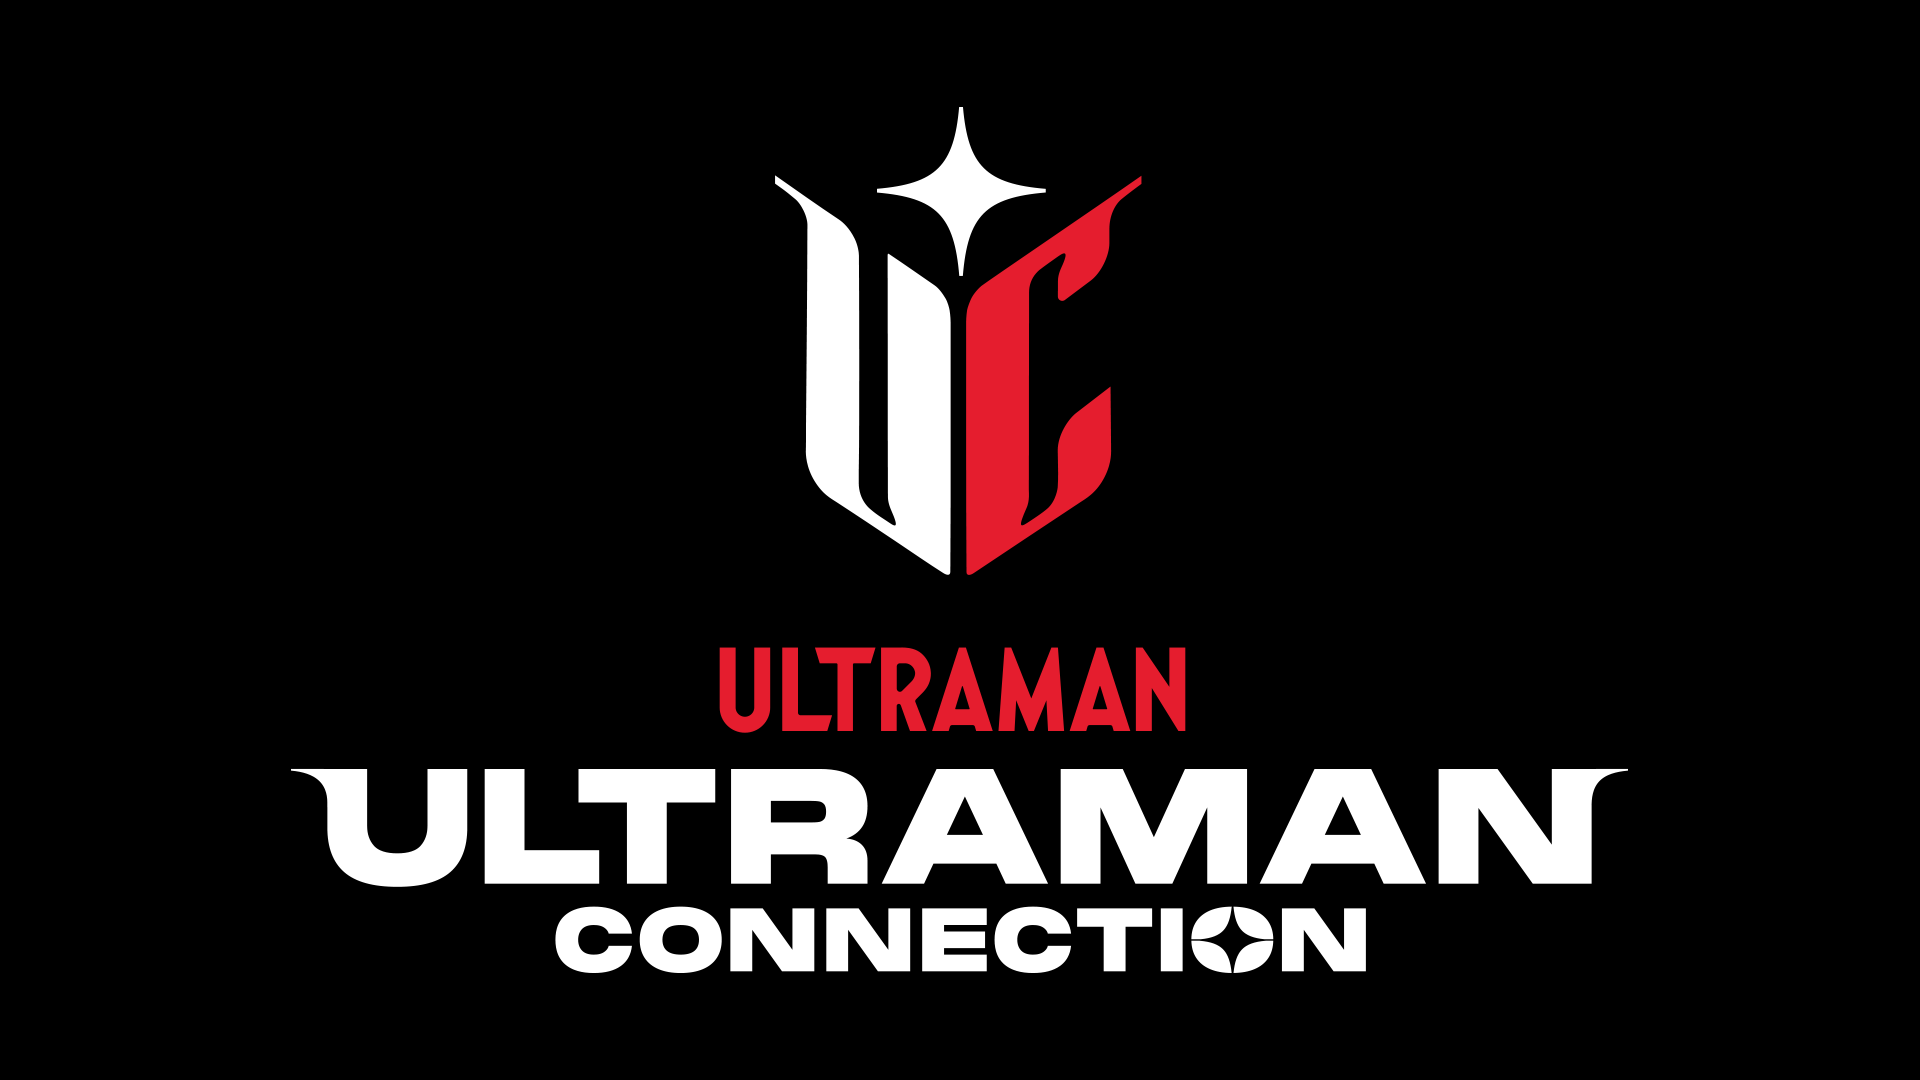 Major Changes Coming to Ultraman Connection